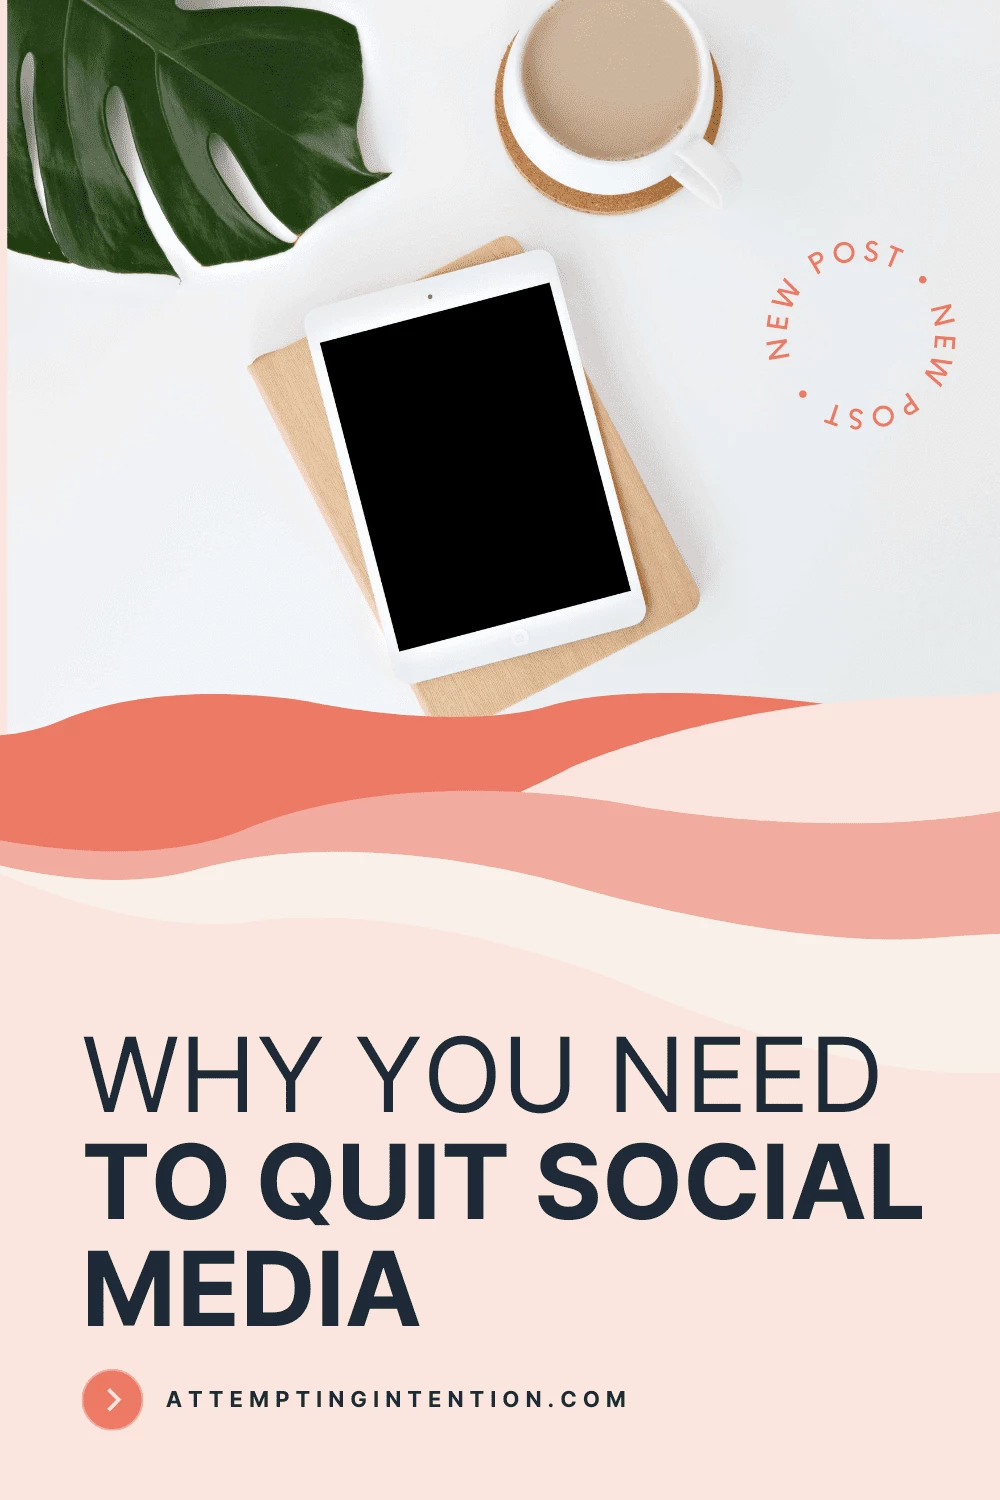 Why you need to quit social media - new post at attemptingintention.com